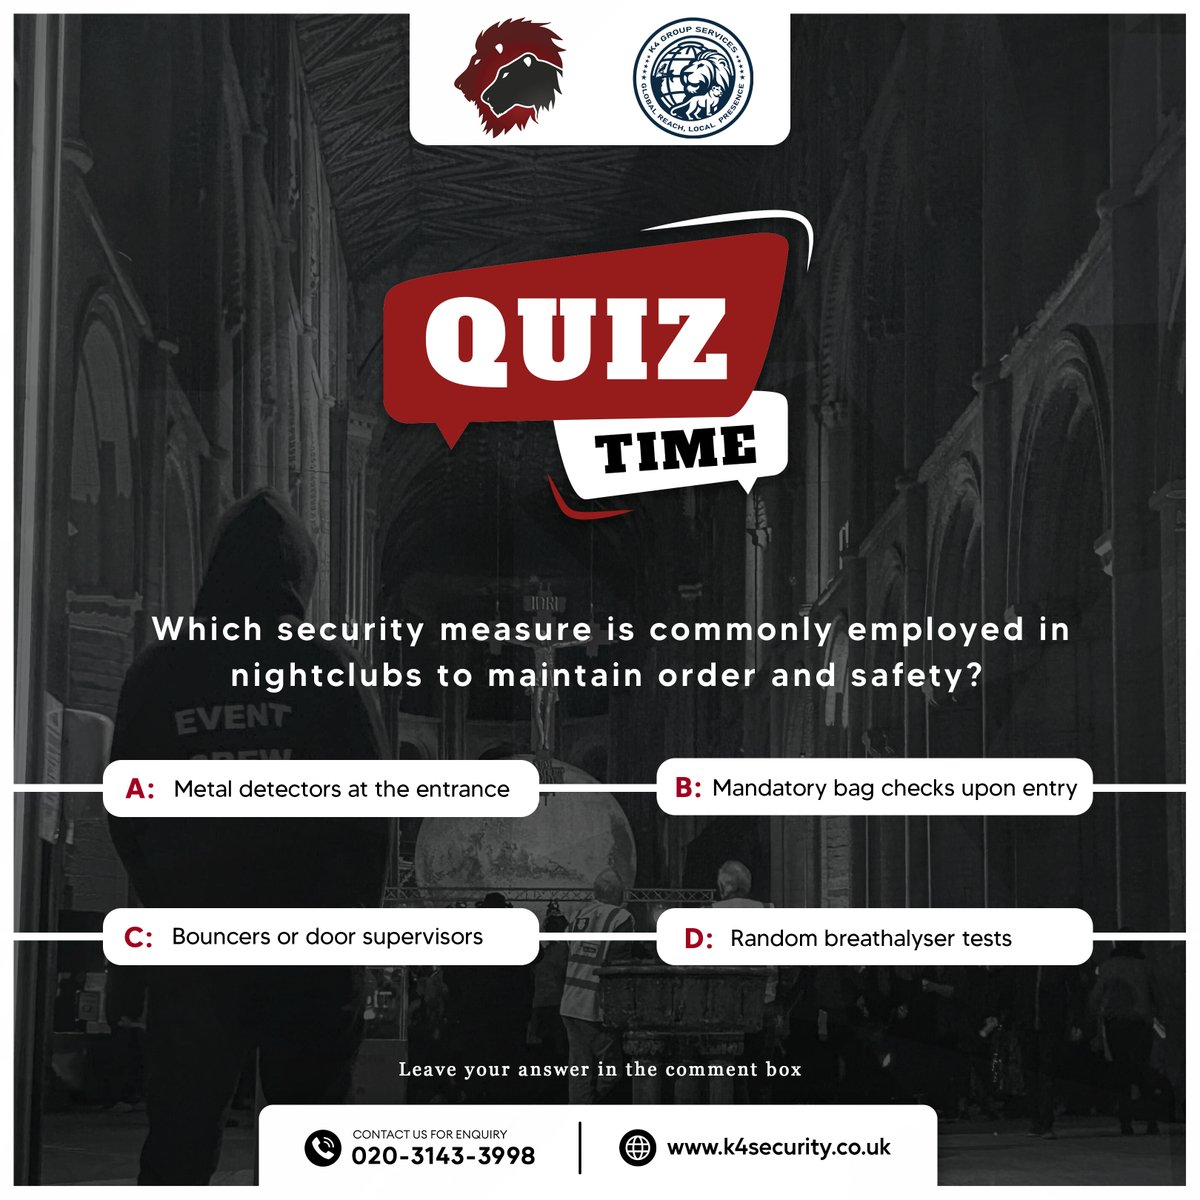 Test your security knowledge with our latest quiz post!

Join the conversation and share your answer below! Let's see who can crack the code!

#SecurityQuiz #NightclubSafety #TestYourKnowledge